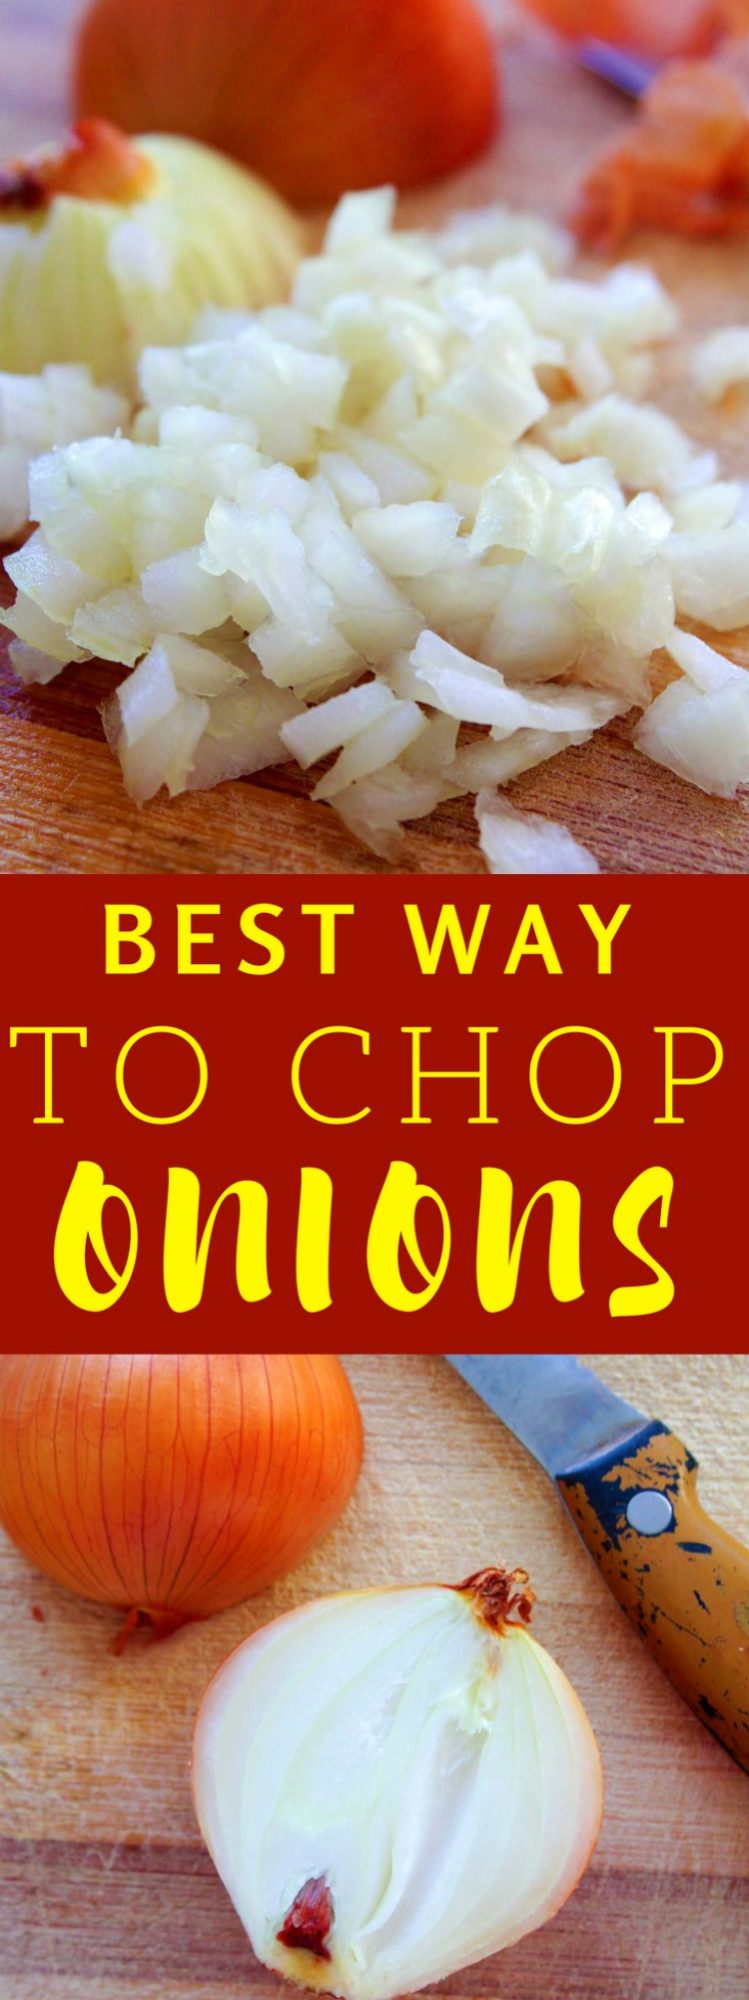 Best Way To Chop An Onion